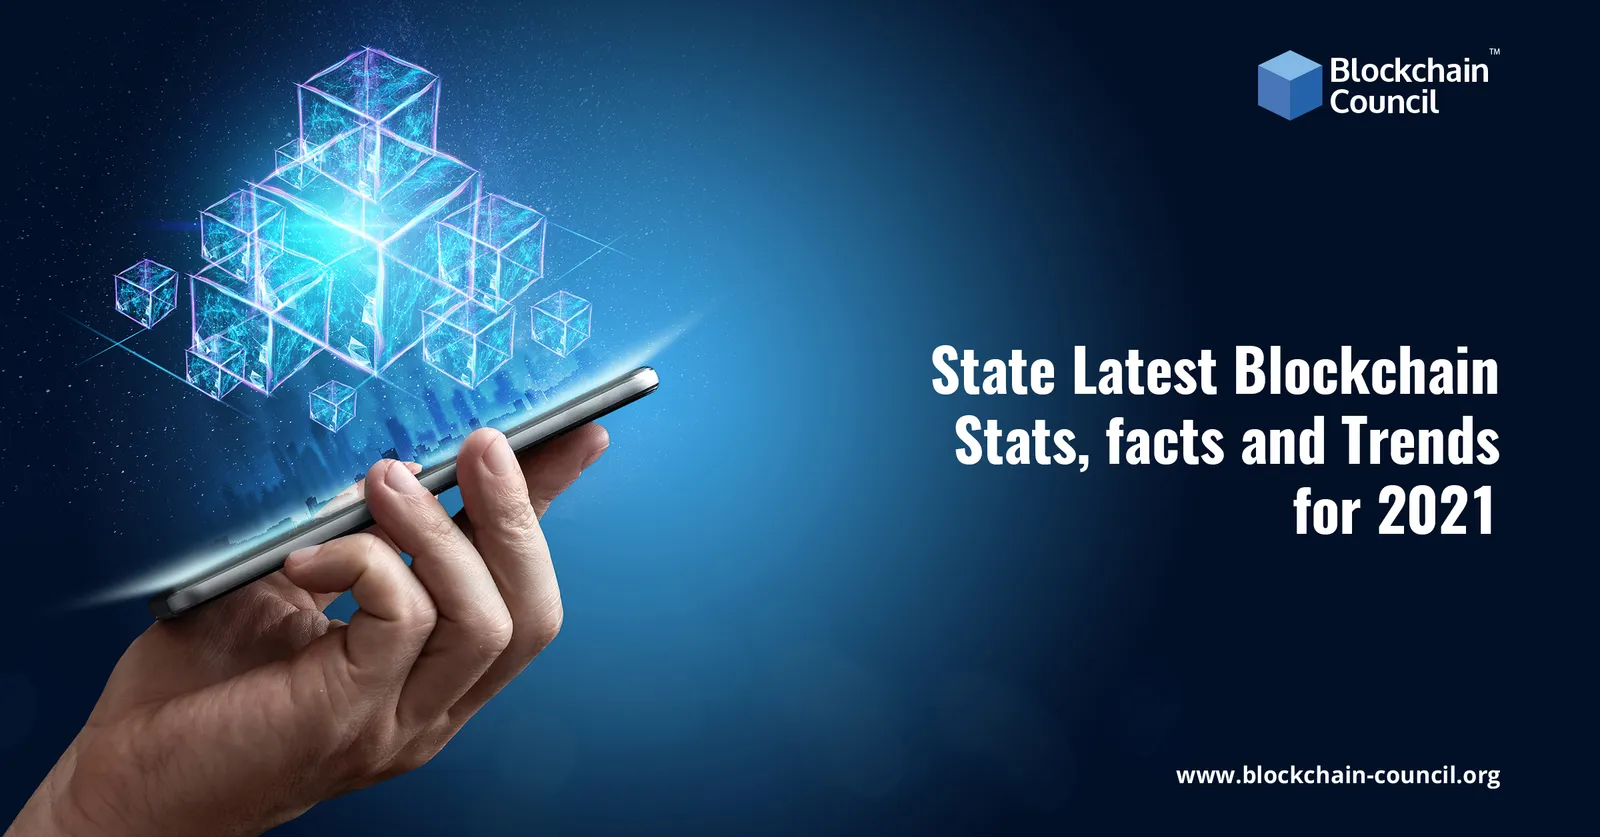 2021 Blockchain Statistics, Facts, and Trends